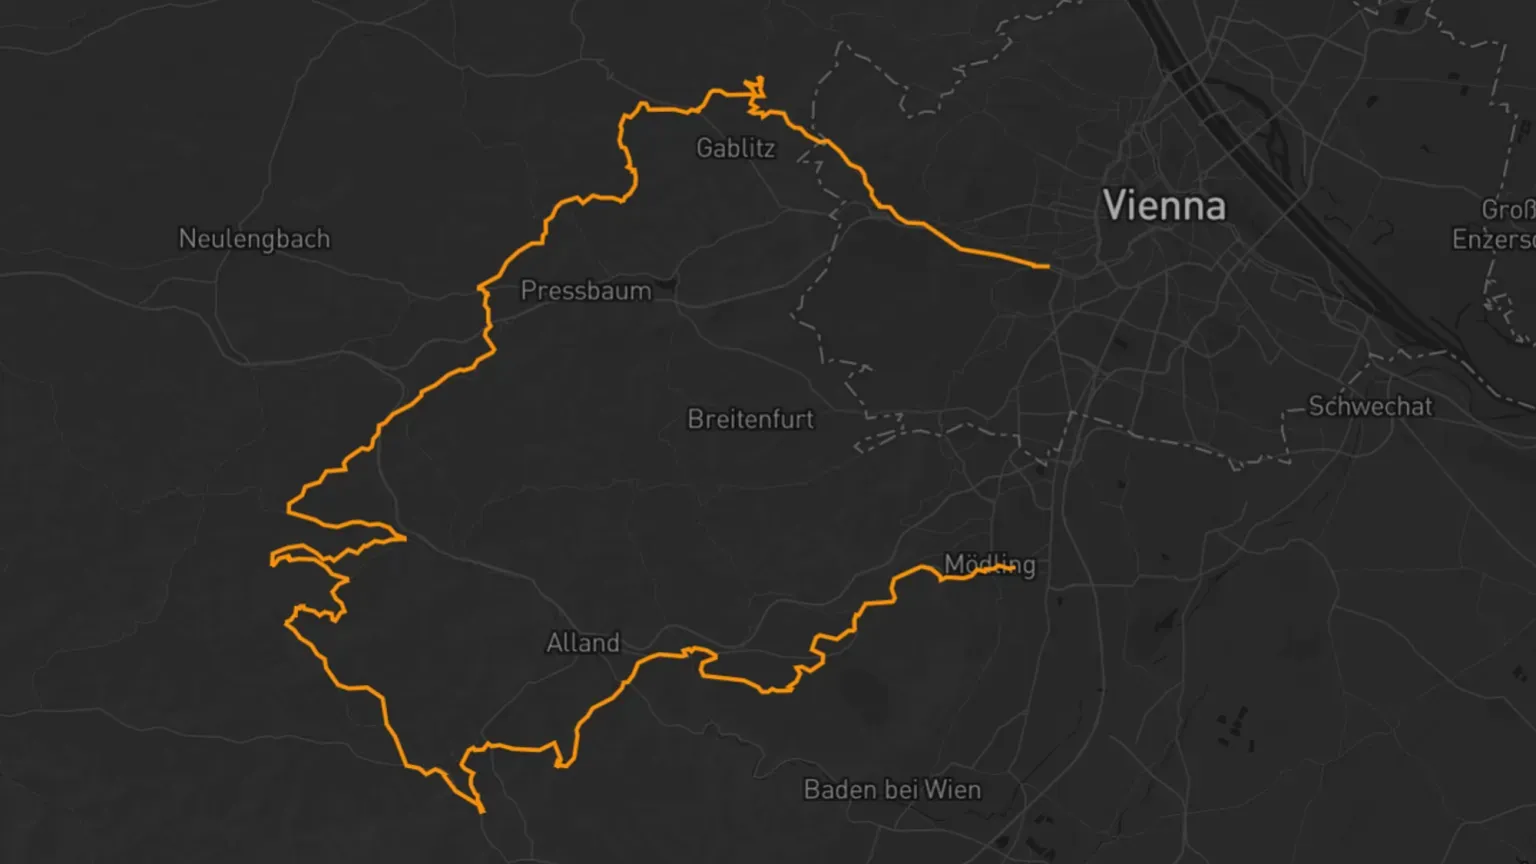 Grevet Number 2 on the Map. From Vienna to the Wienerwald on Gravel.